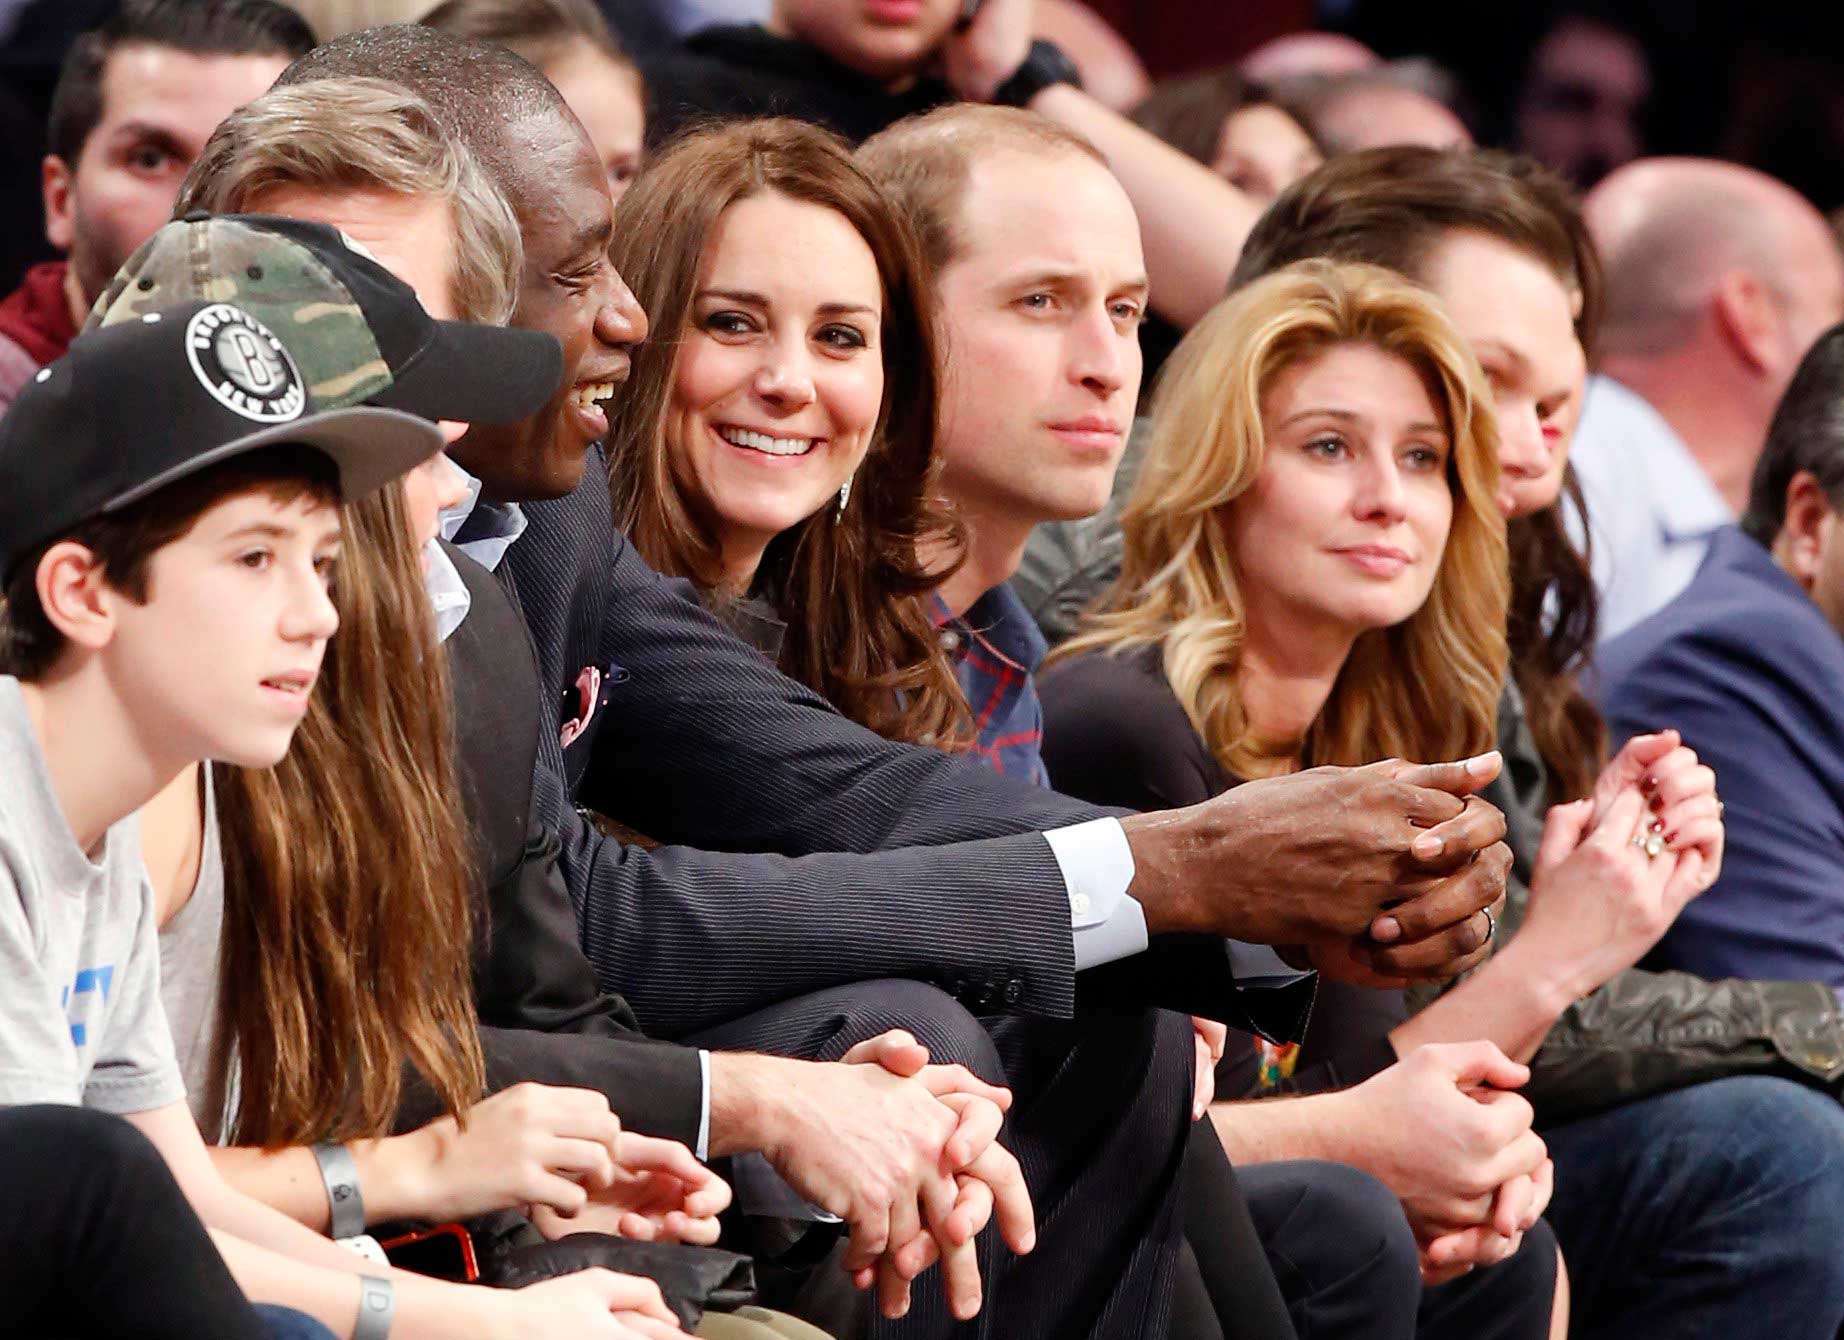 Former Houston Rockets player Dikembe Mutombo talks to the Duchess as they sit courtside.